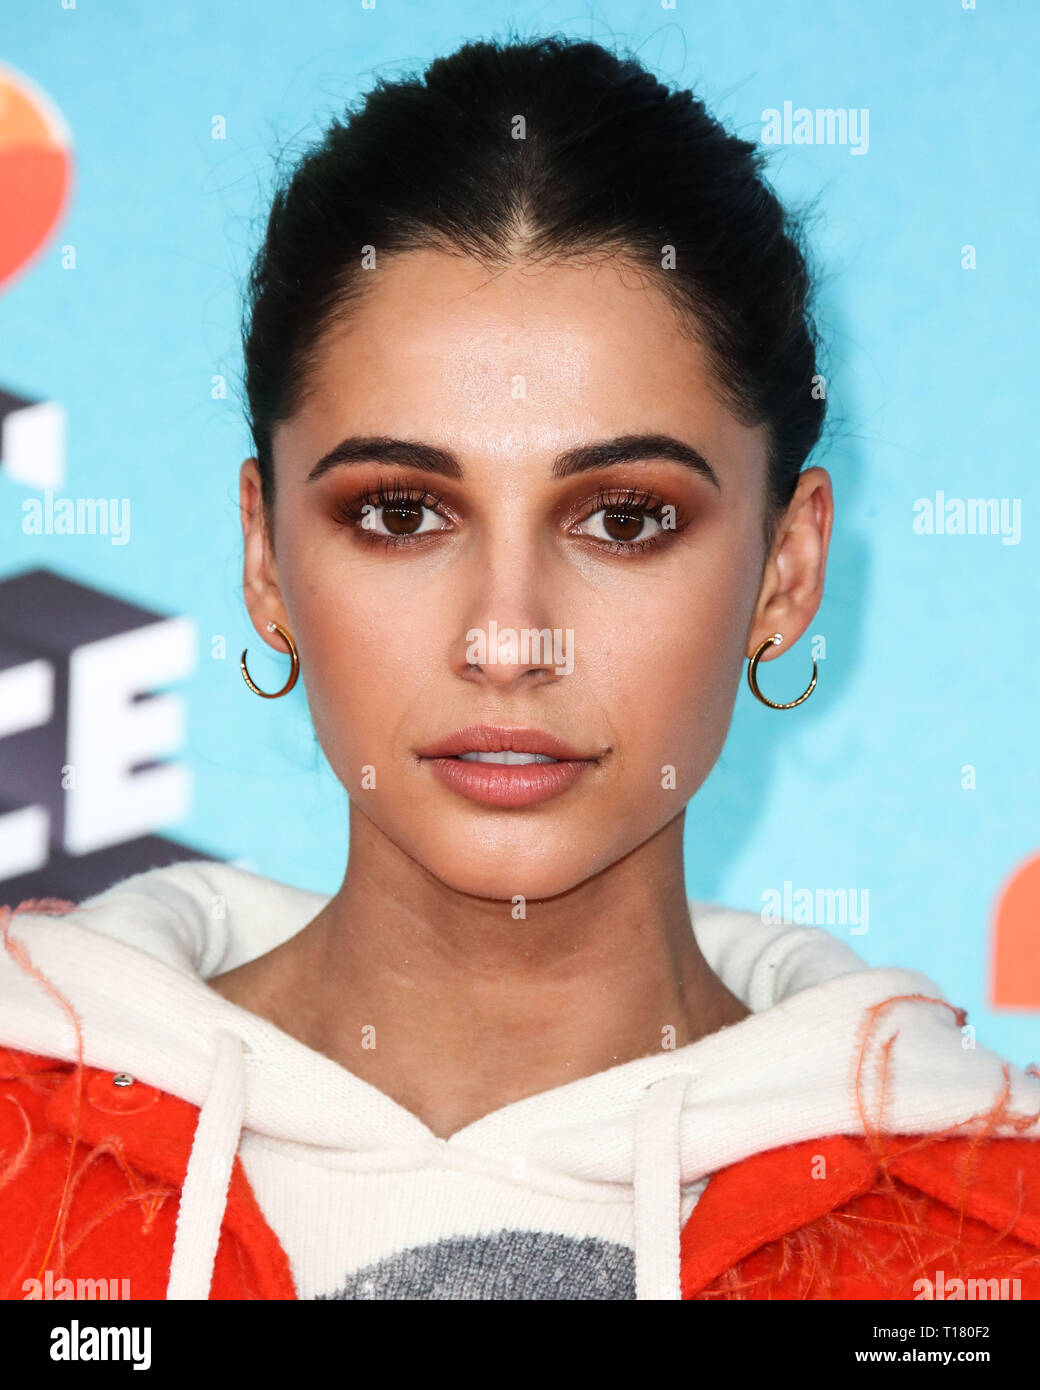 Los Angeles, USA. 23rd Mar, 2019.  Naomi Scott arrives at Nickelodeon's 2019 Kids' Choice Awards held at the USC Galen Center on March 23, 2019 in Los Angeles, California, United States. (Photo by Xavier Collin/Image Press Agency) Credit: Image Press Agency/Alamy Live News Stock Photo